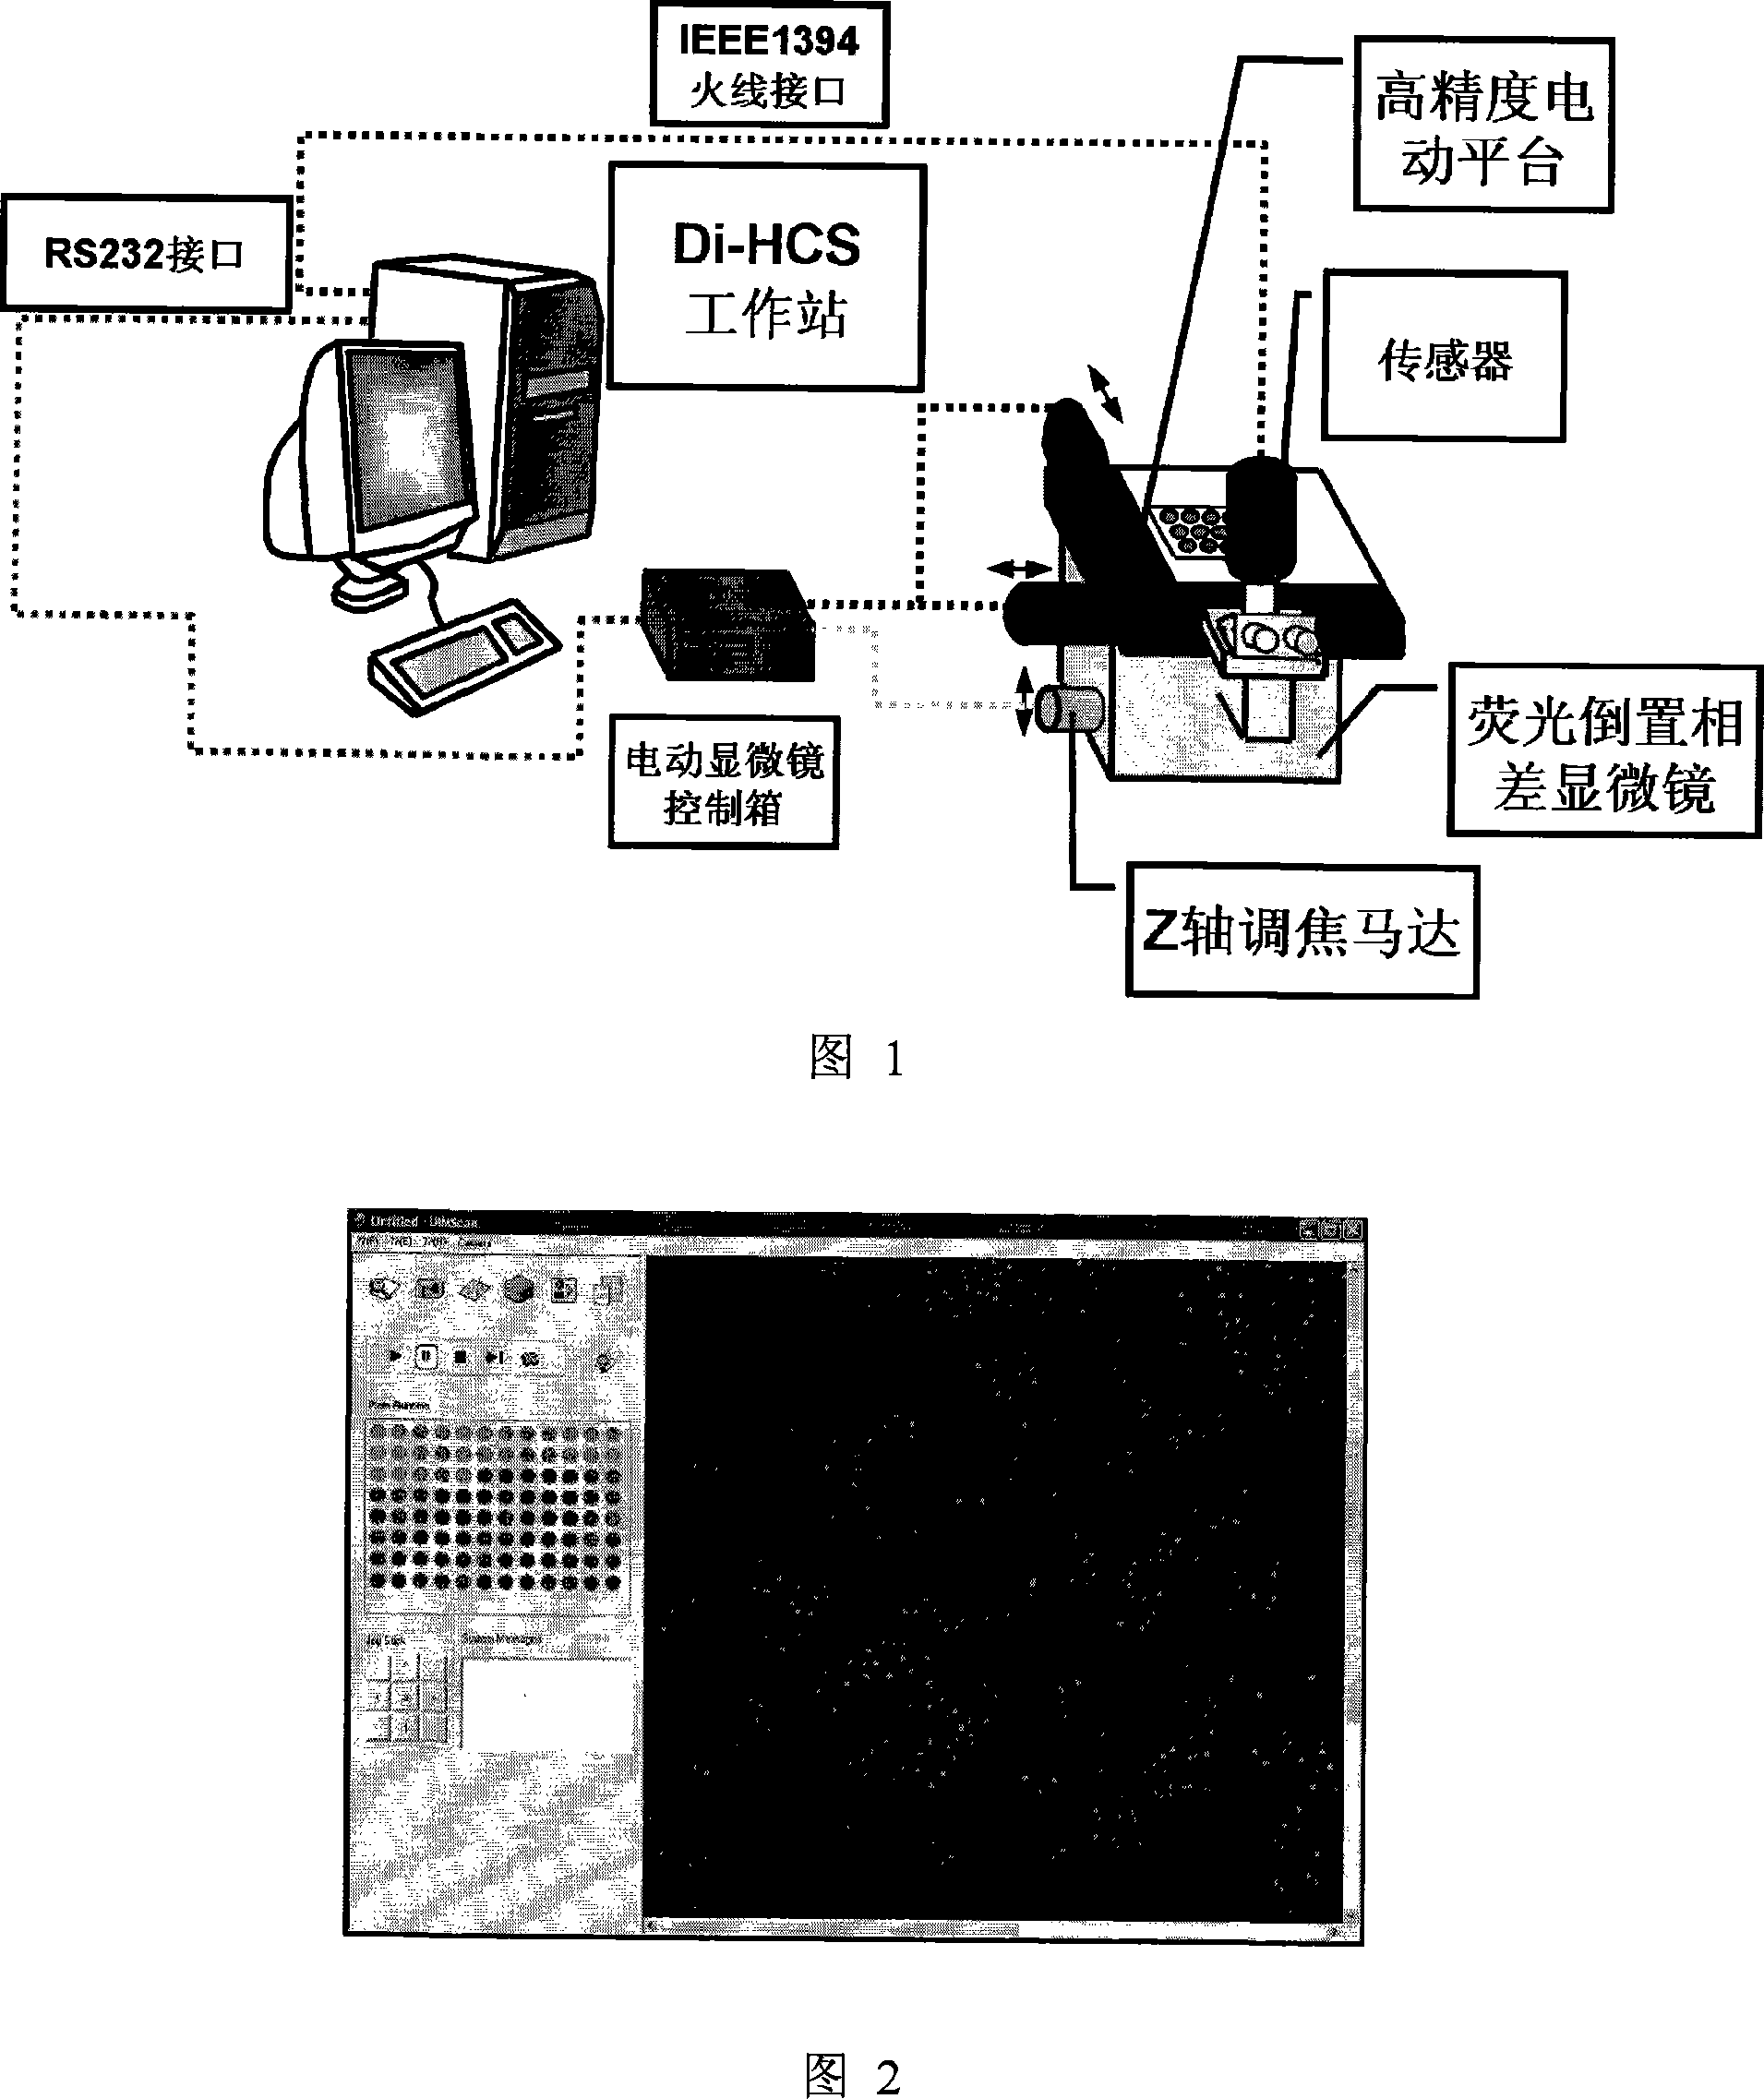 Antineoplastic drug evaluation and screening method based on cell microscopic image information